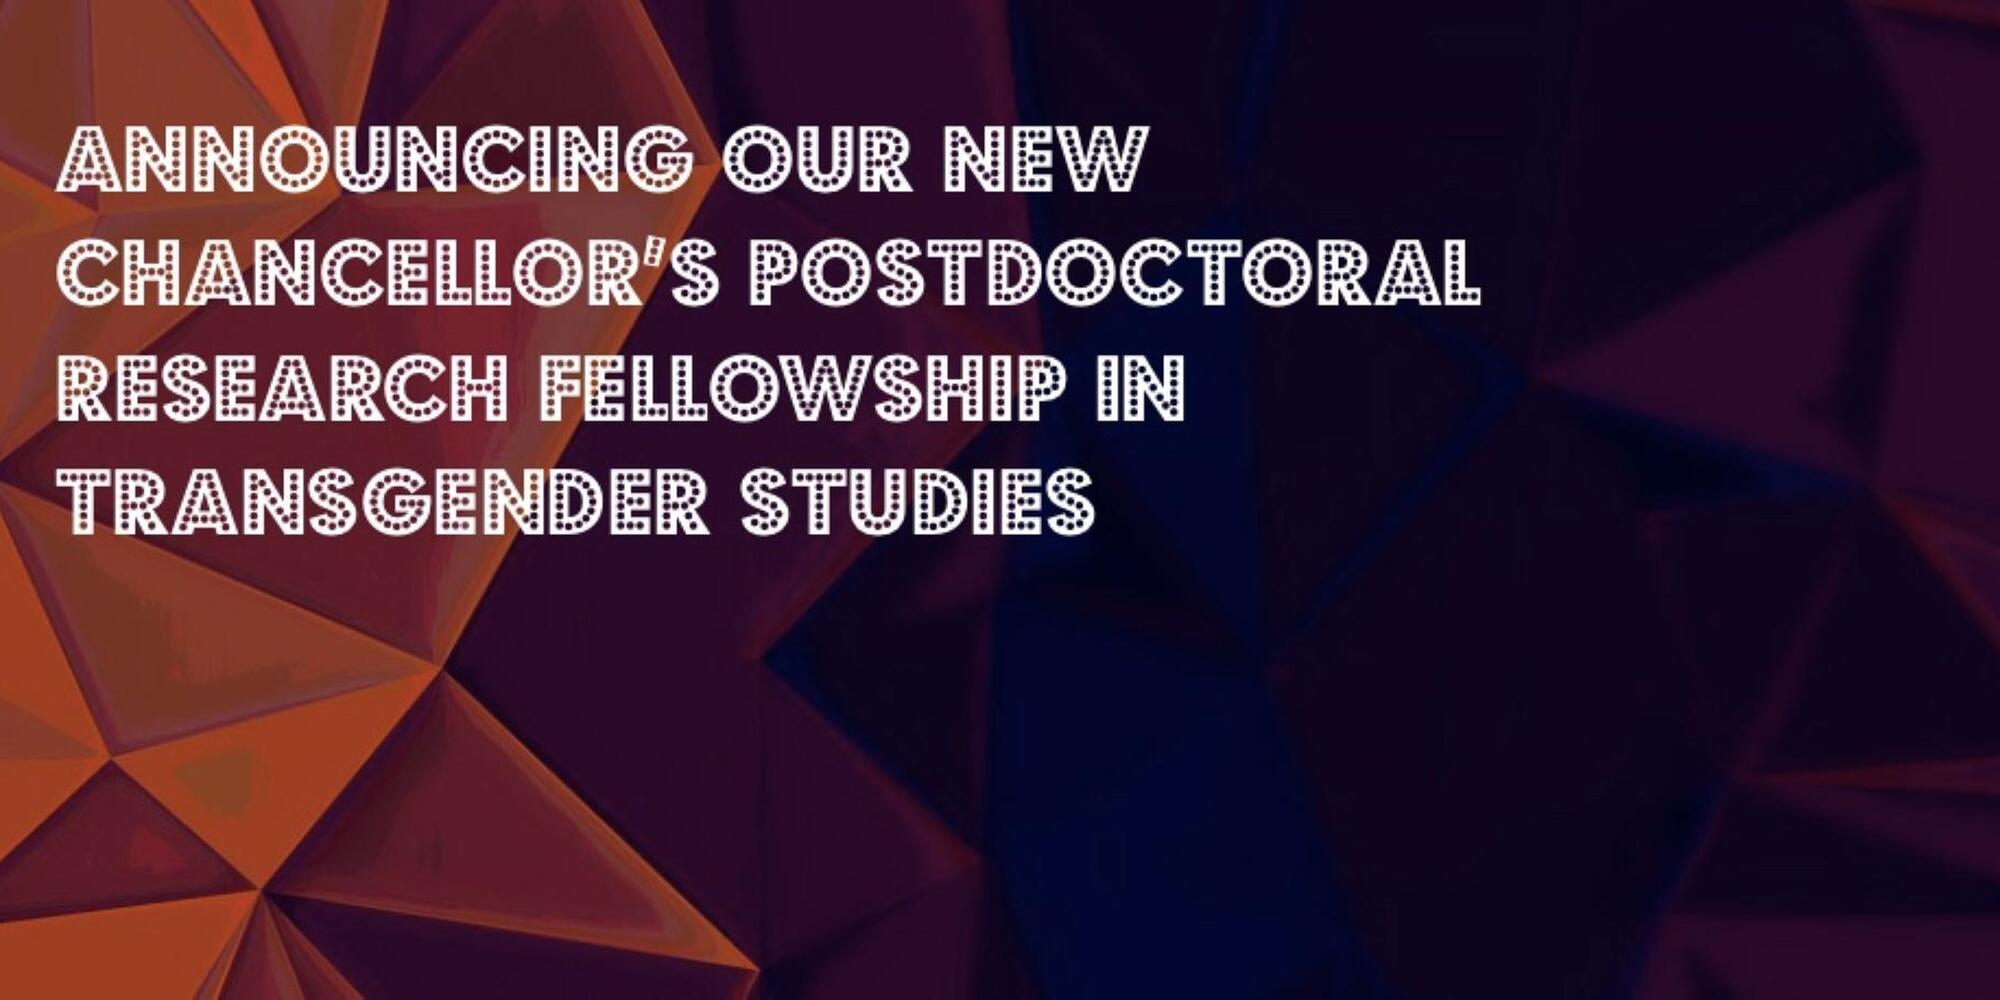 In white text, "Announcing our new Chancellor's Postdoctoral Research Fellowship in Transgender Studies at the Department of Gender and Women's Studies" over a dark abtract background